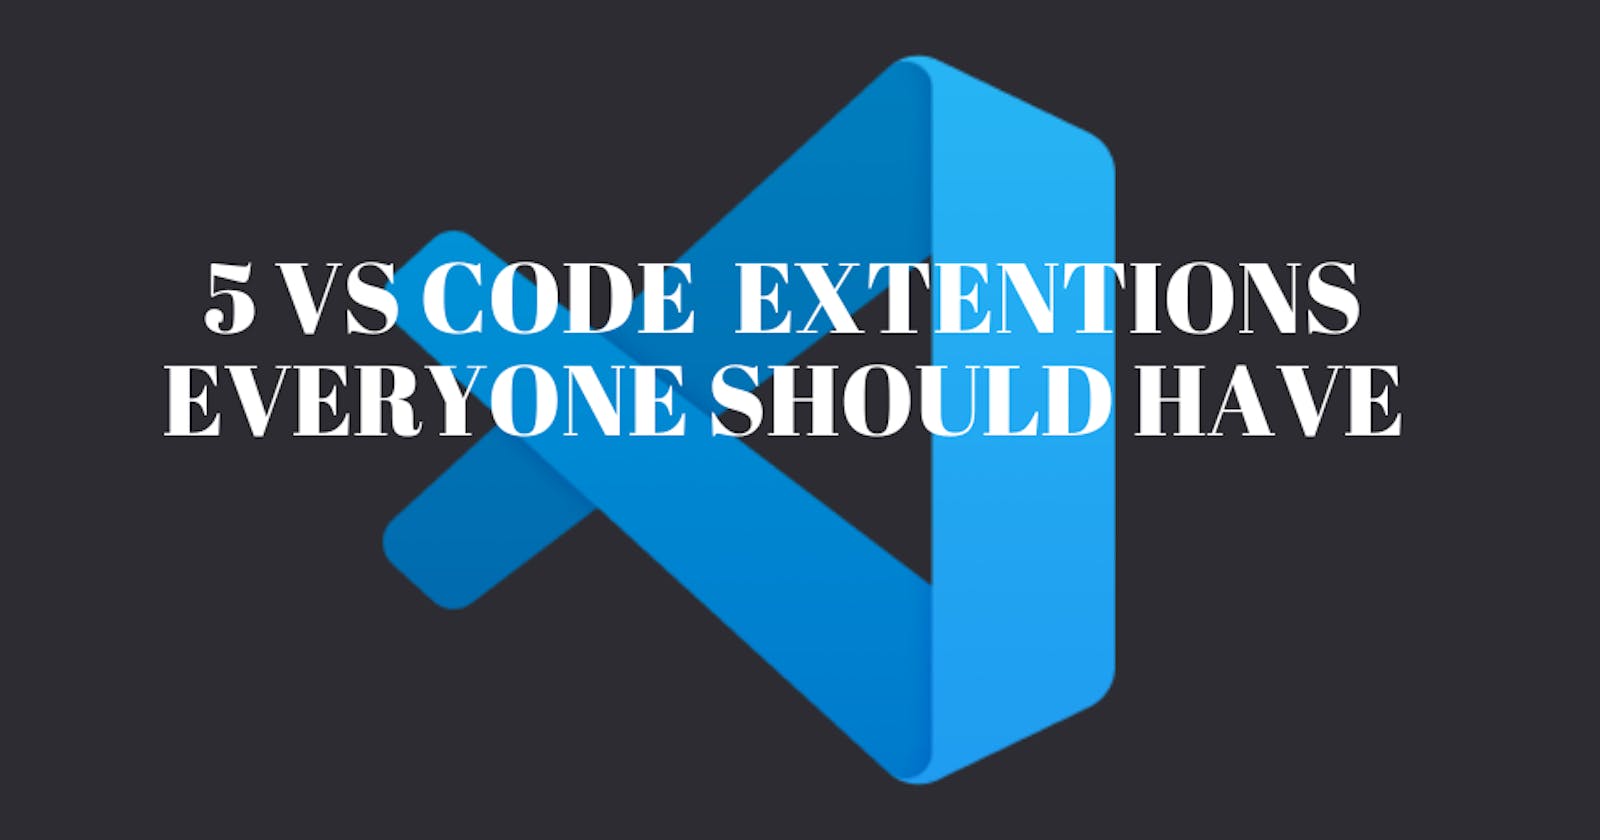 5 VS Code Extensions Everyone Should Have